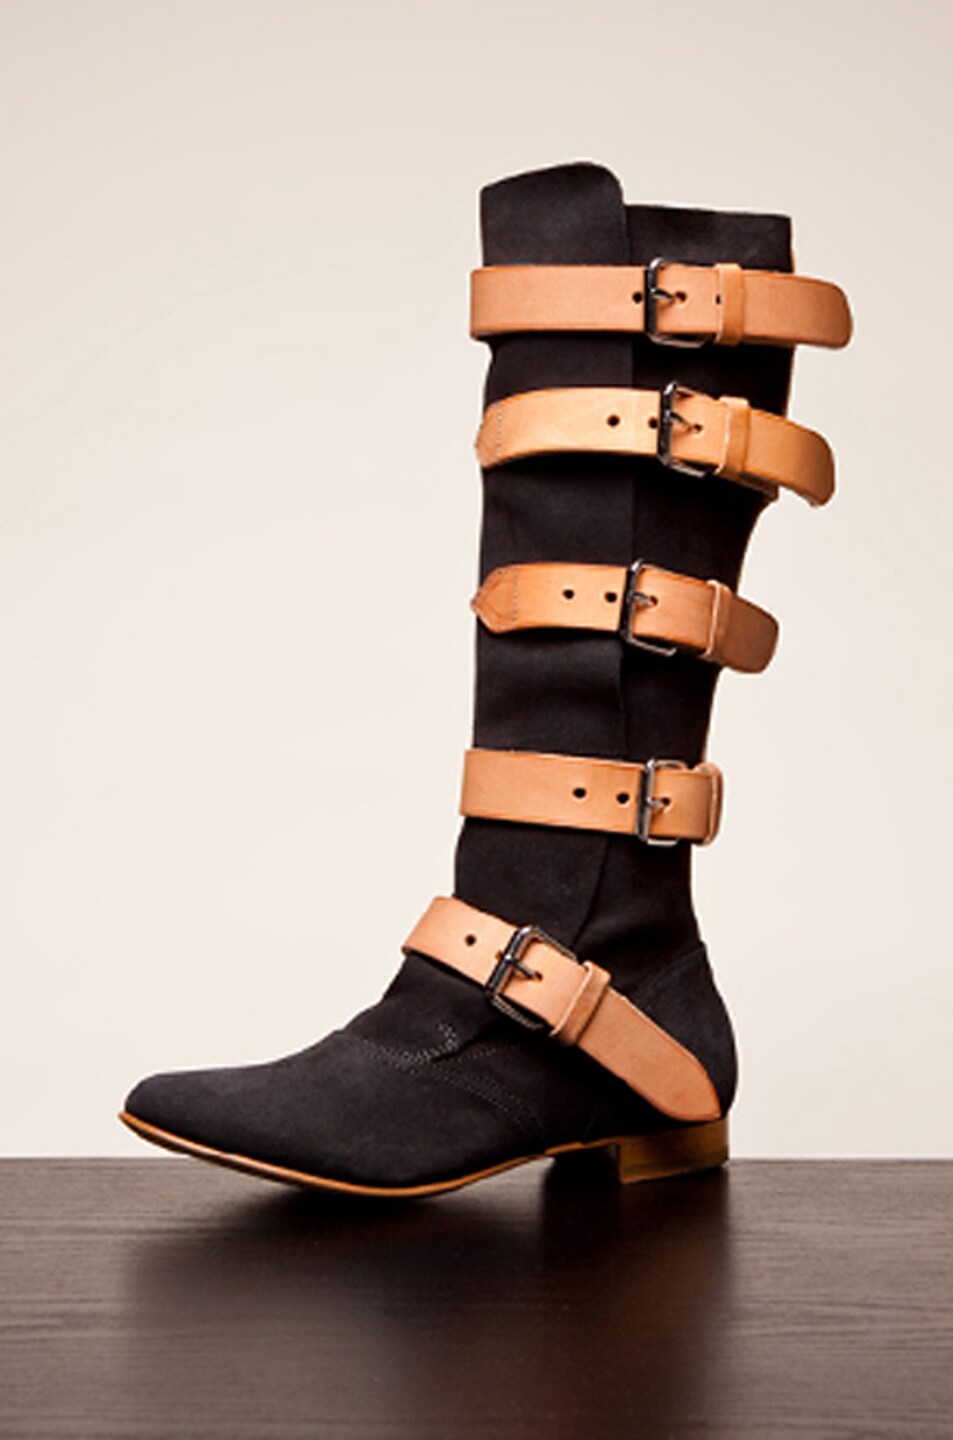 Image 1 of Vivienne Westwood Red Label Pirate Boot in Charcoal Suede & Camel